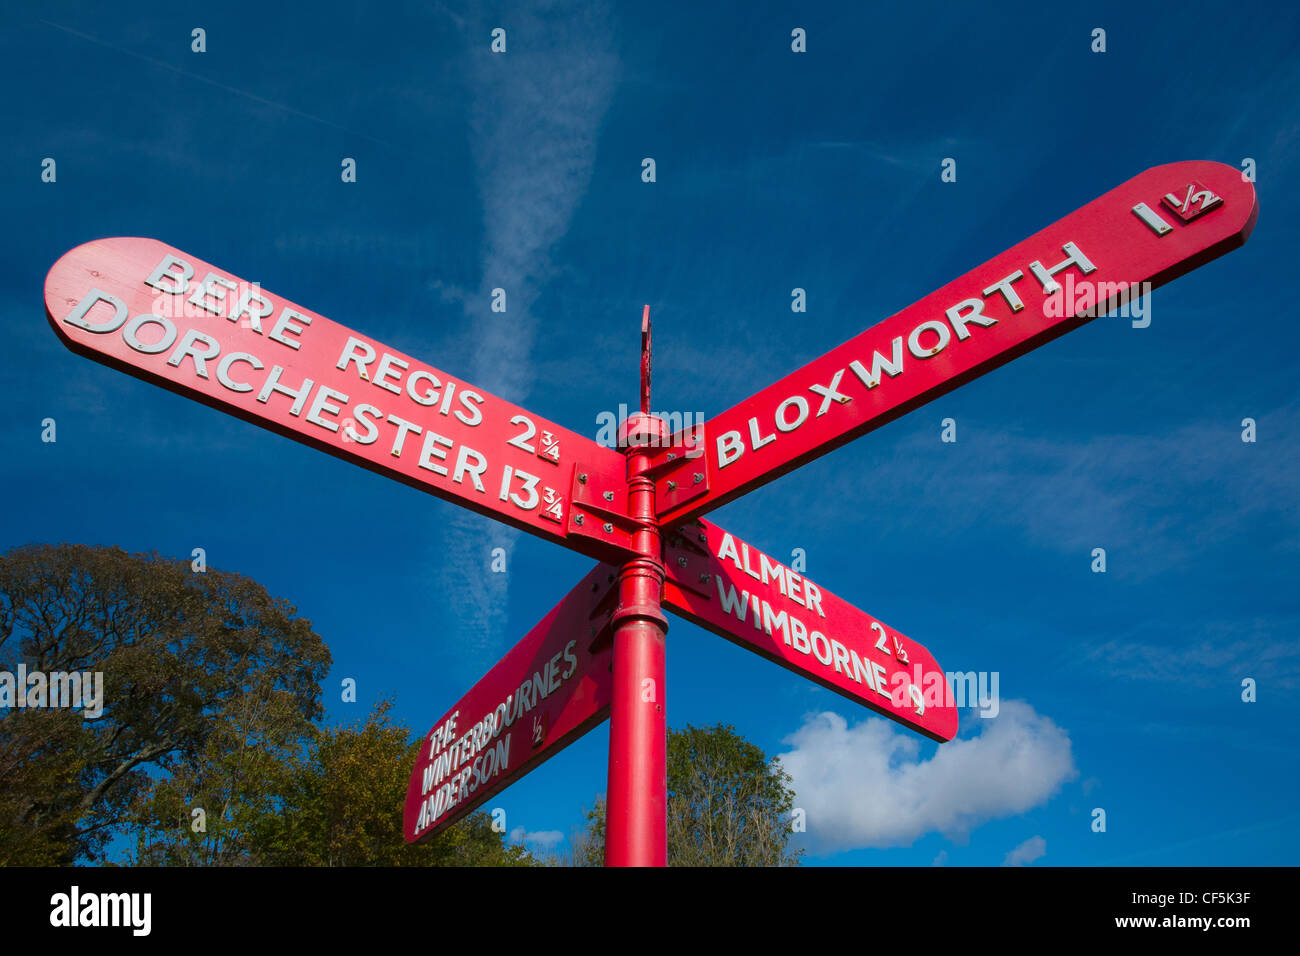 Bright red directional road sign at a crossroads. Stock Photo